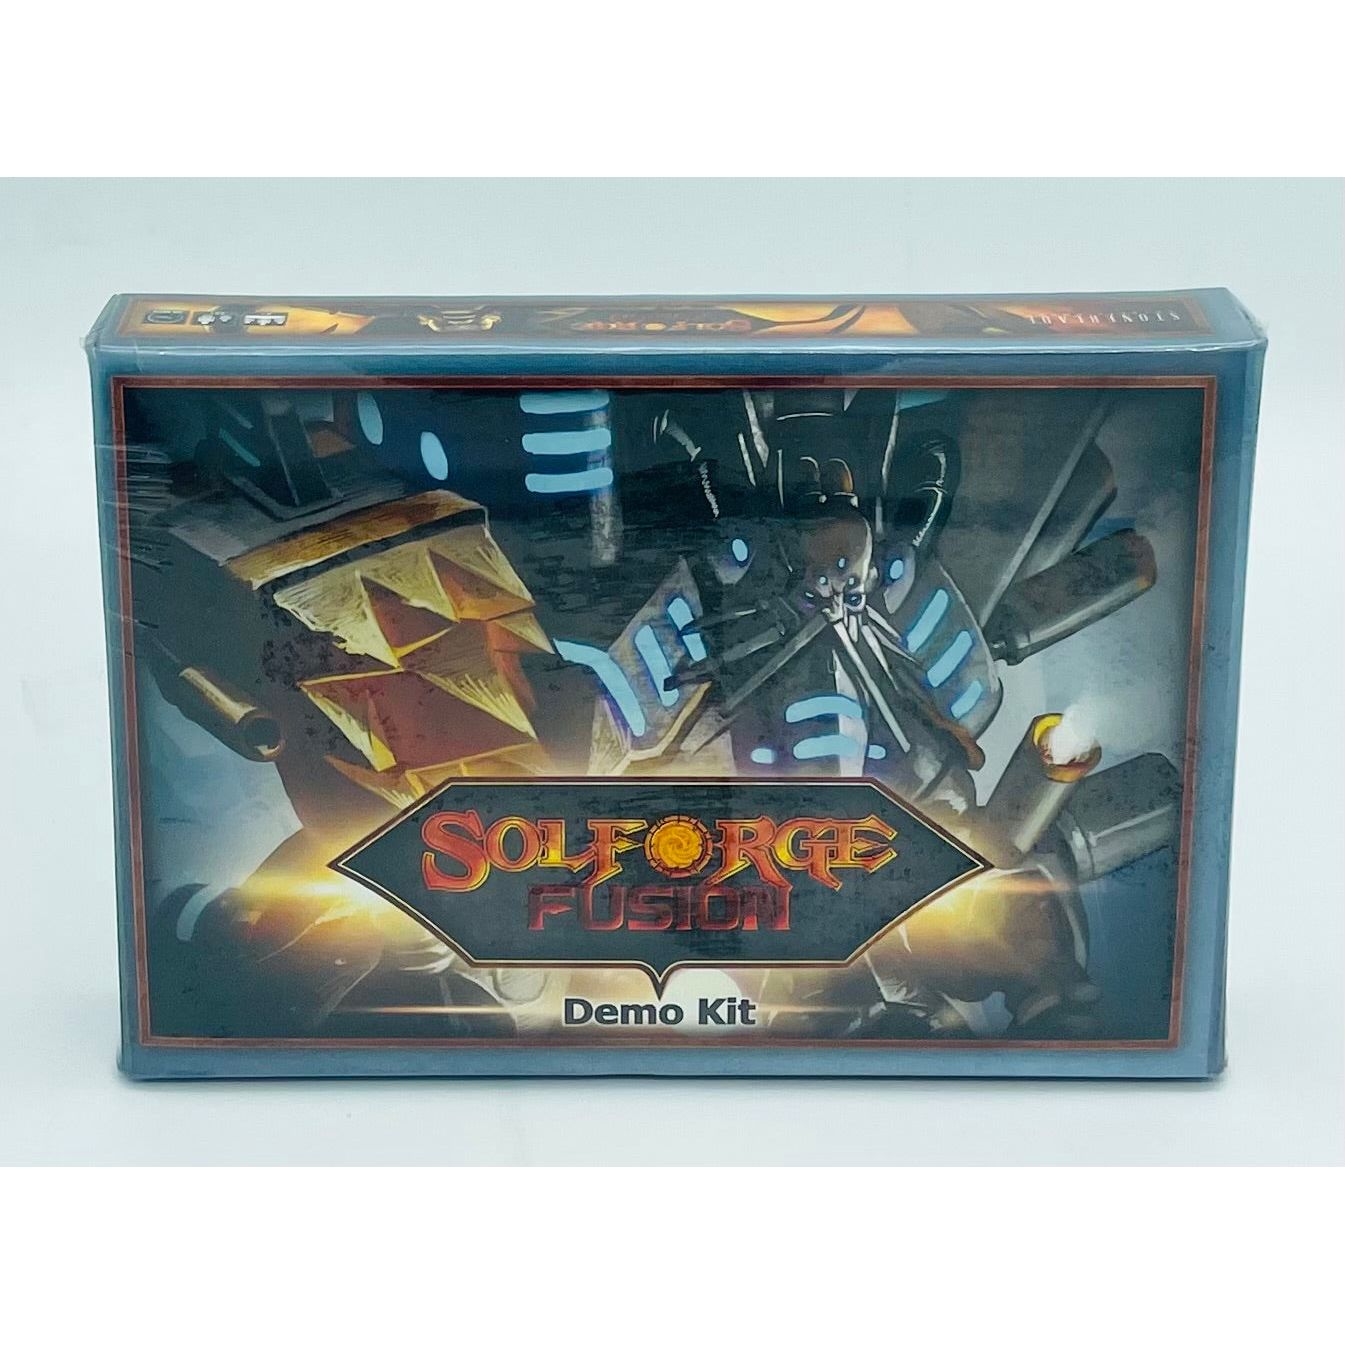 Solforge Fusion Starter Kit Demo, Factory Sealed